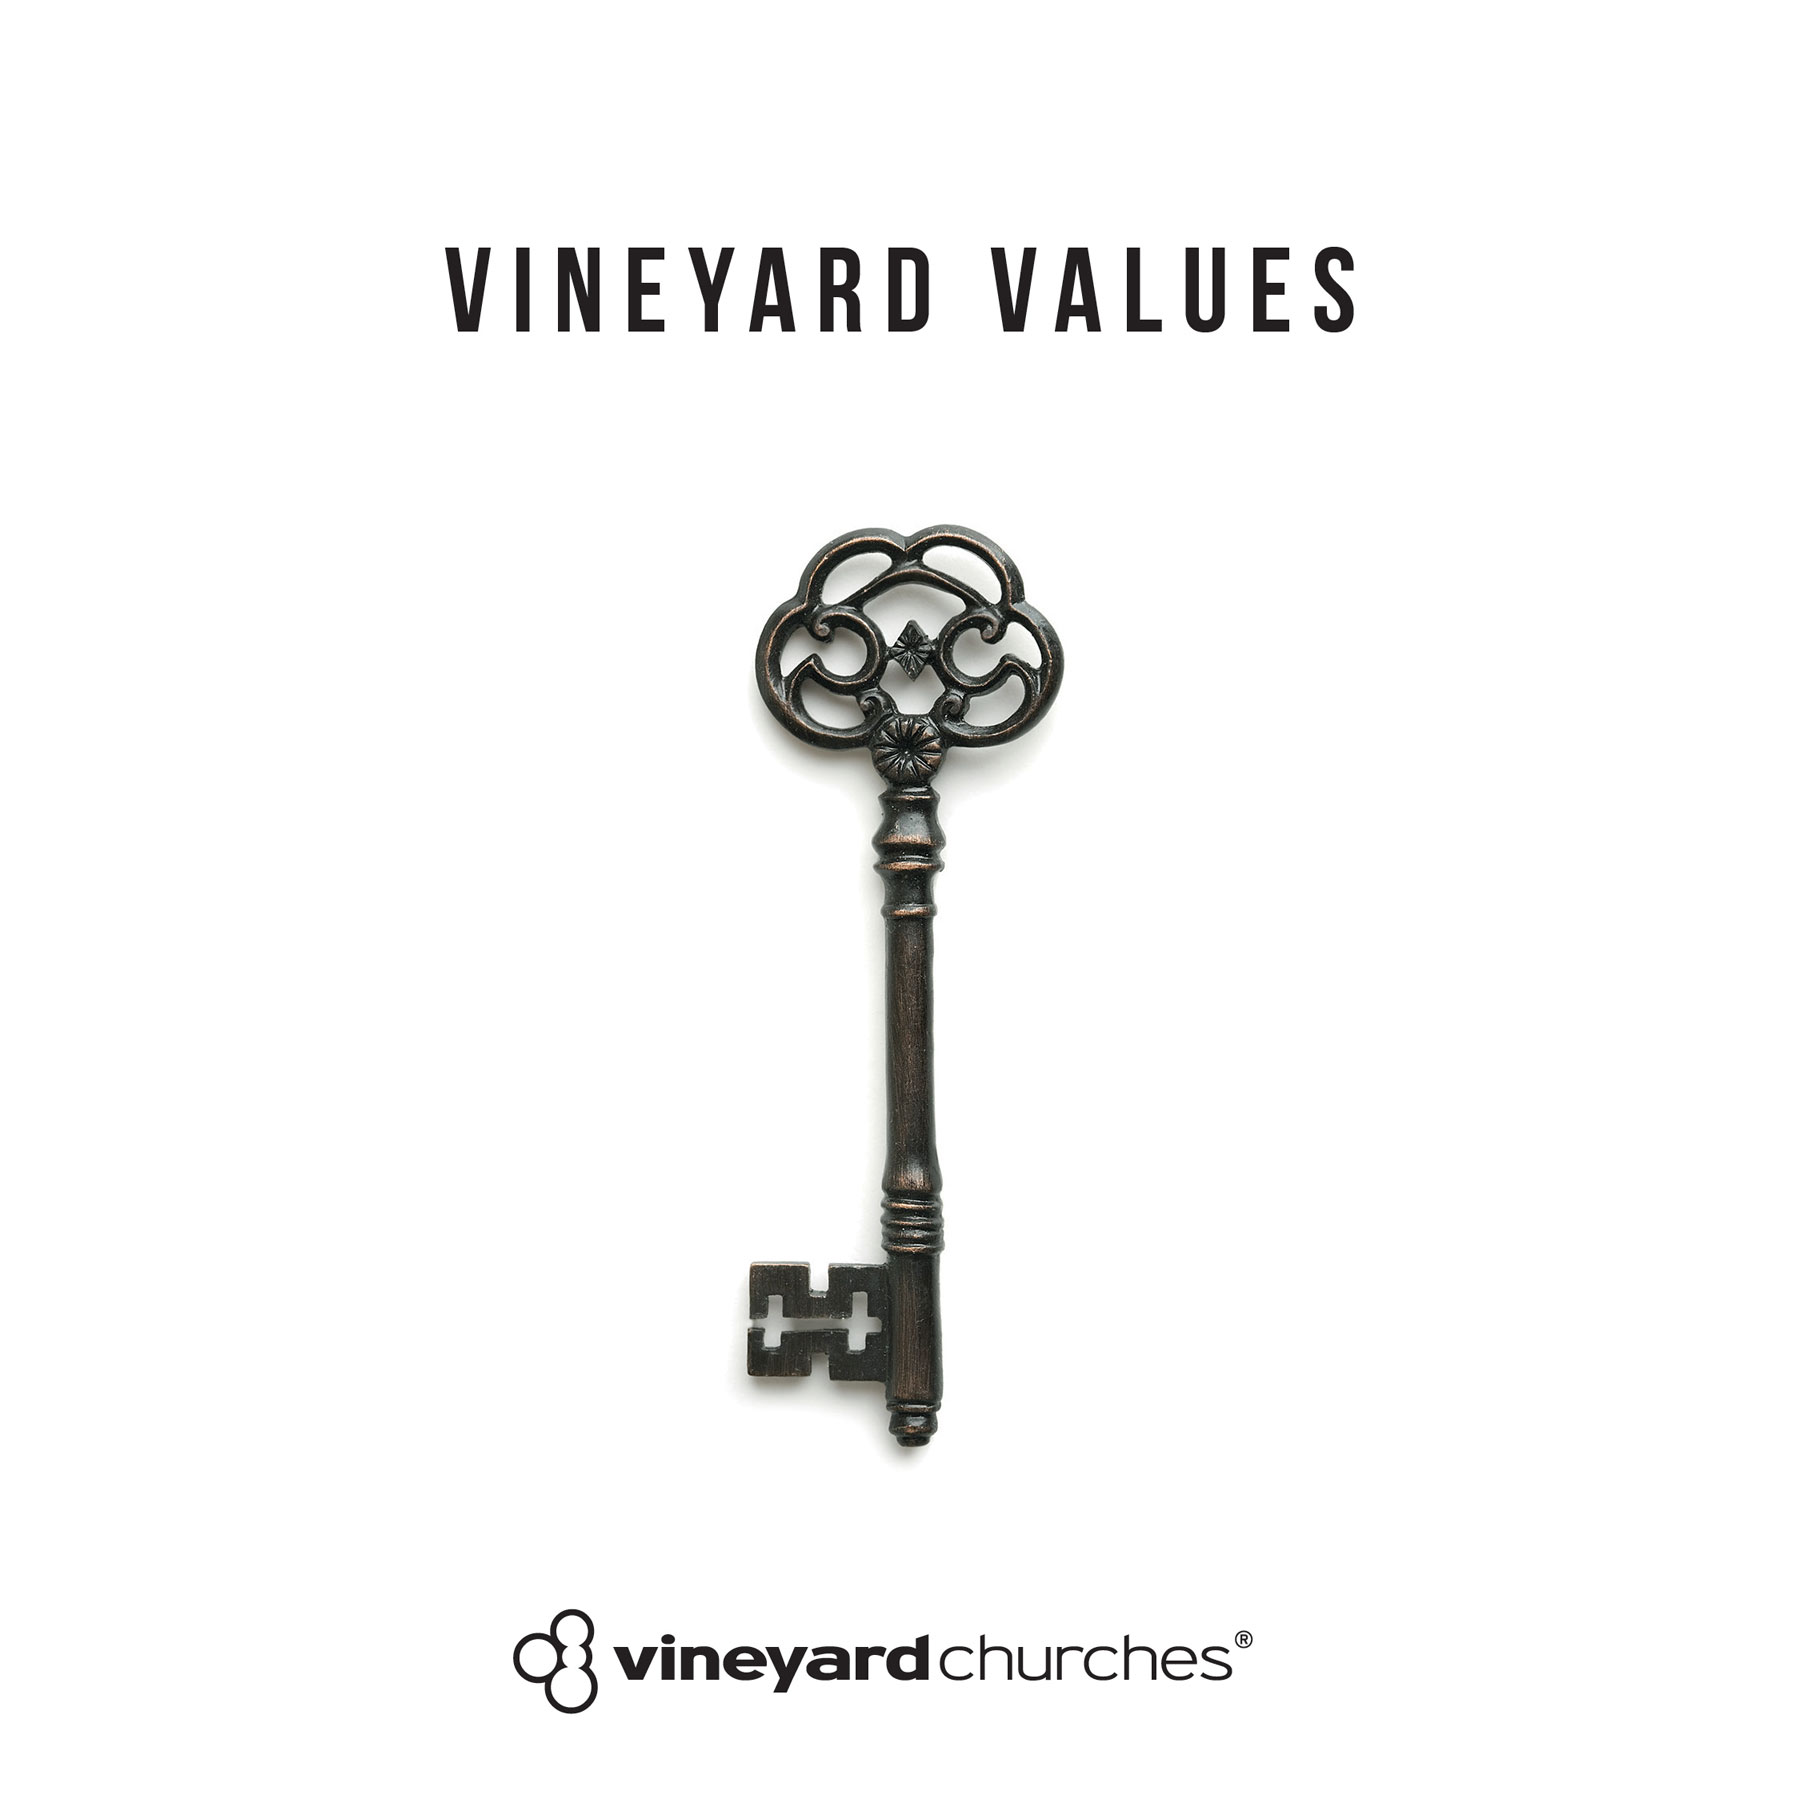 The Story of Vineyard